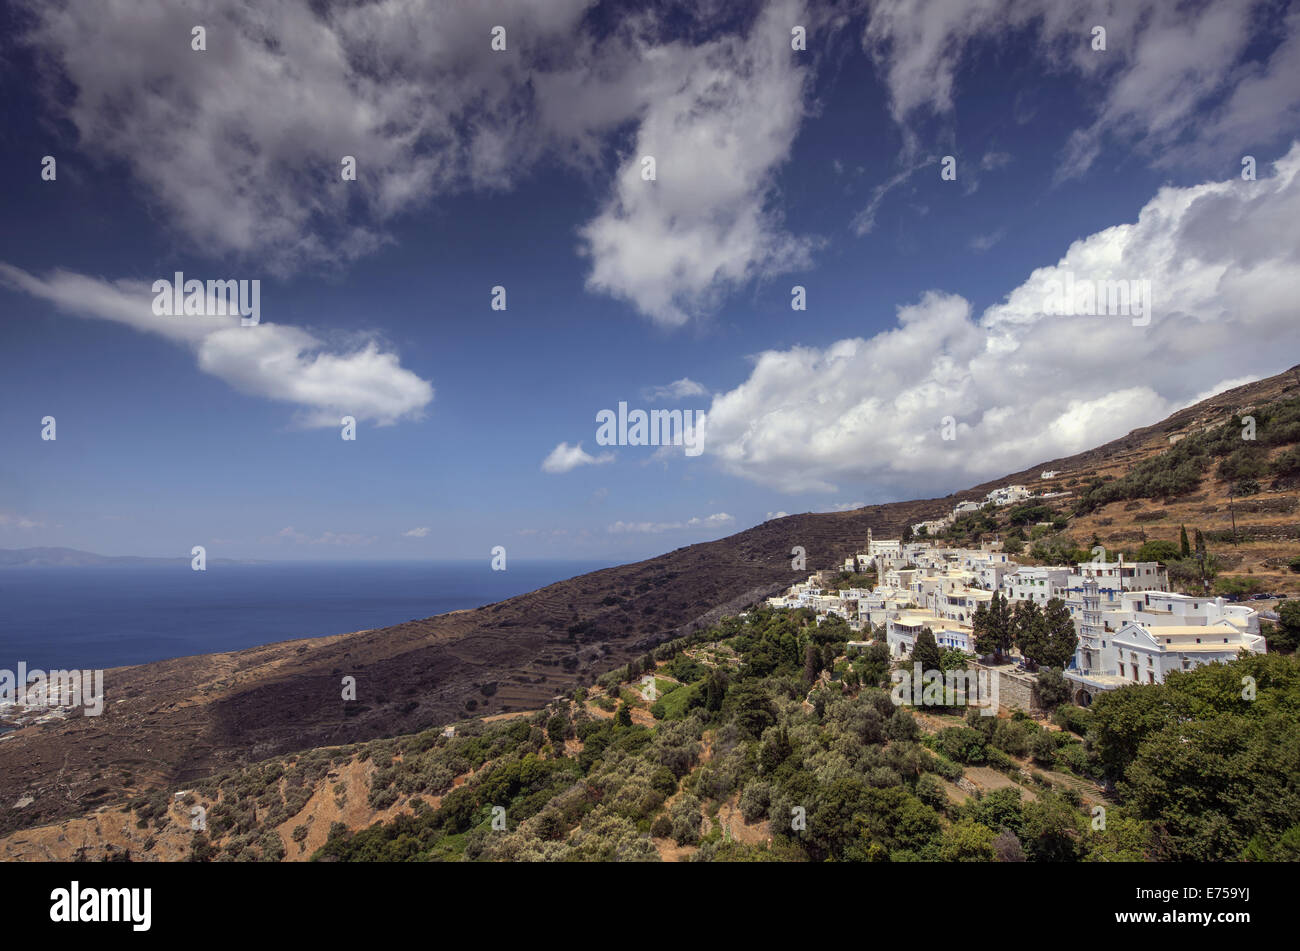 View of Kardiani gazing the Aegean sea, one of the most authentic traditional villages of Tinos island, Cyclades, Greece Stock Photo